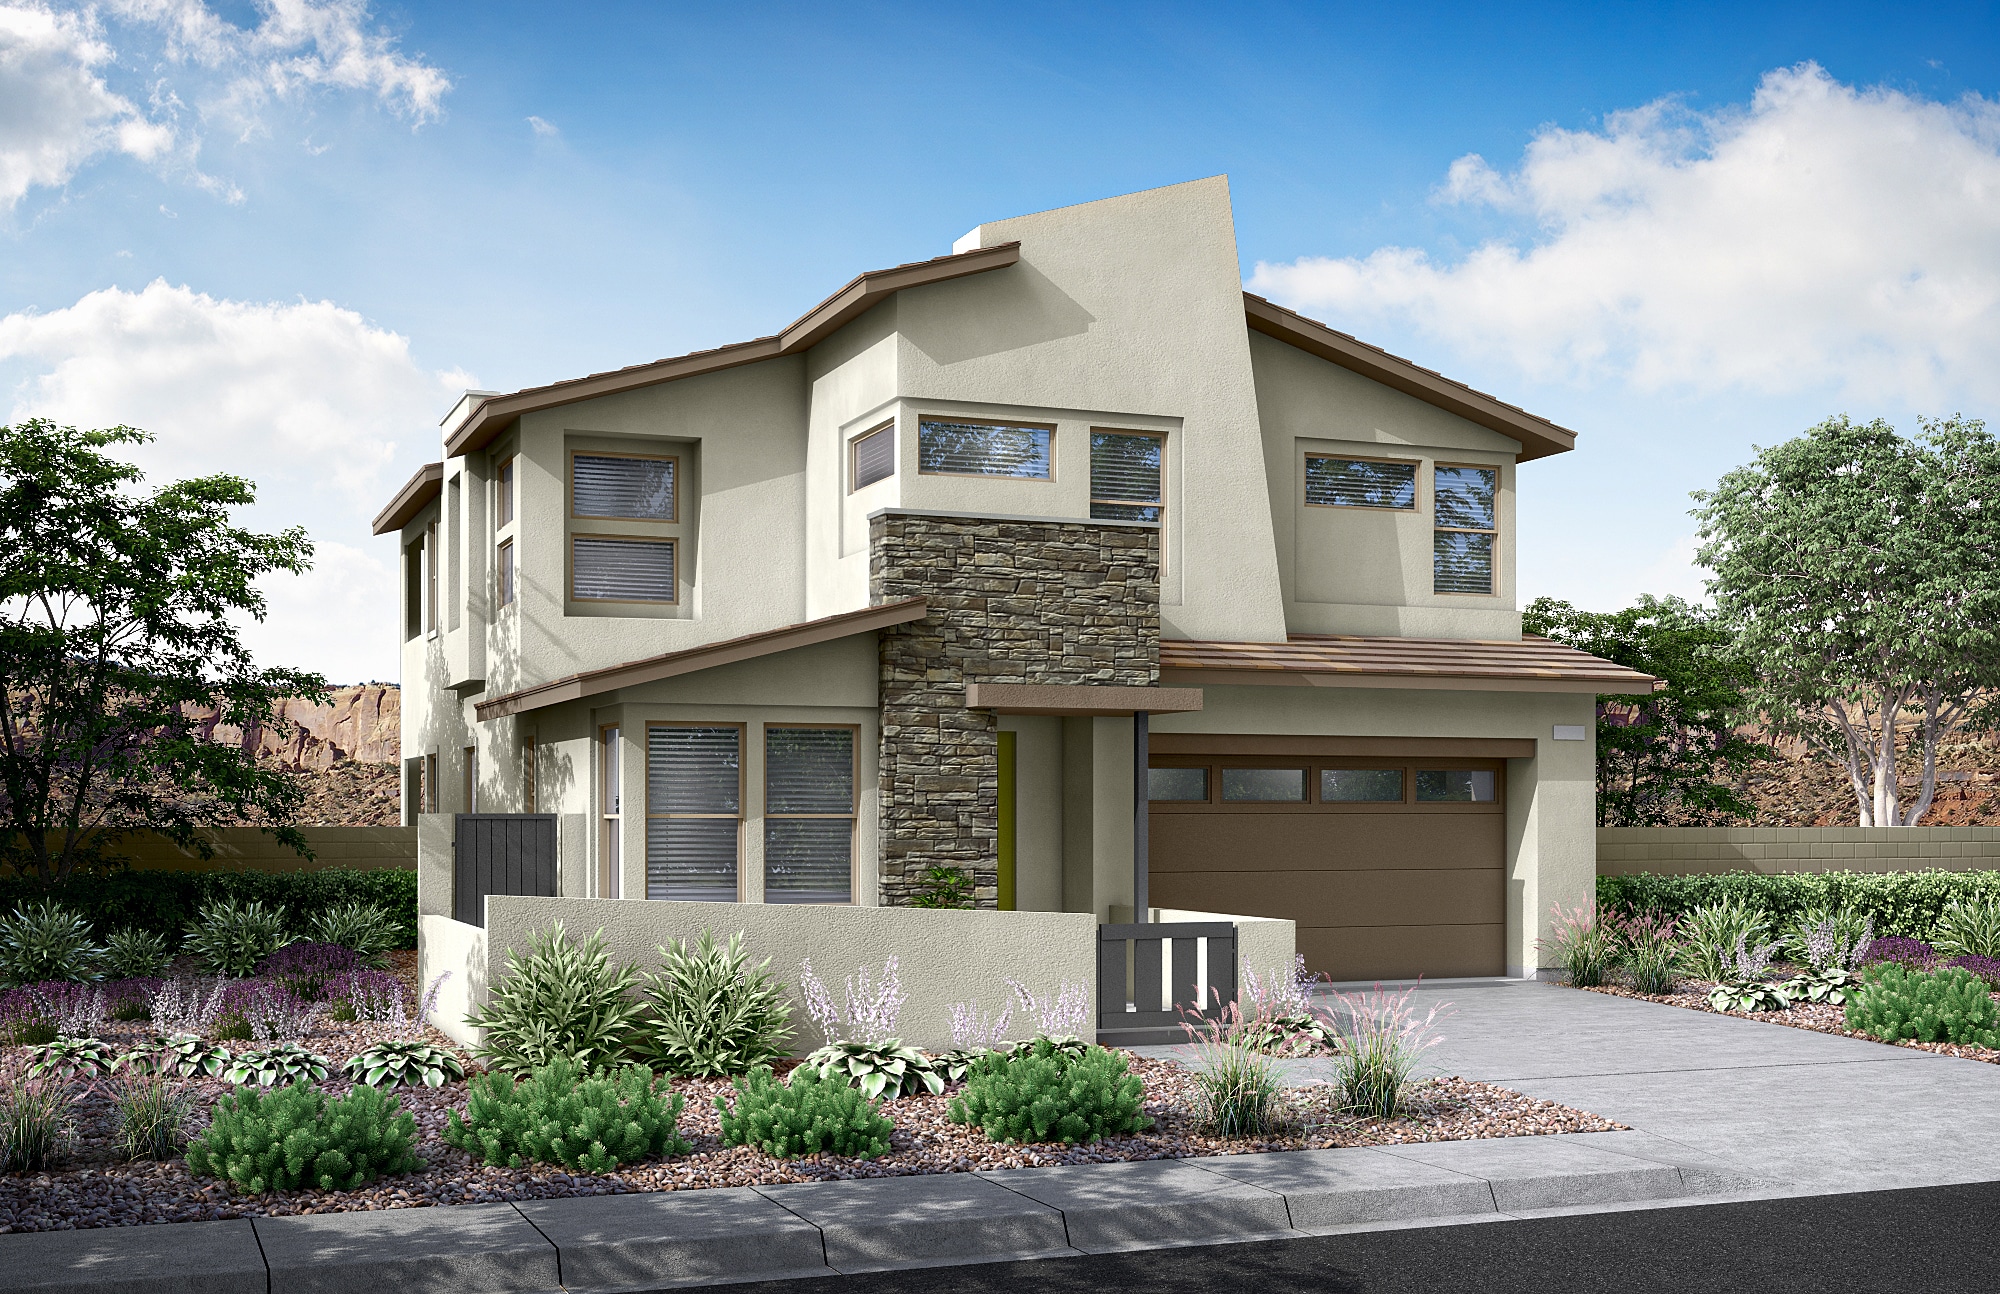 Front Elevation C of Plan 2 at Arroyo's Edge by Tri Pointe Homes